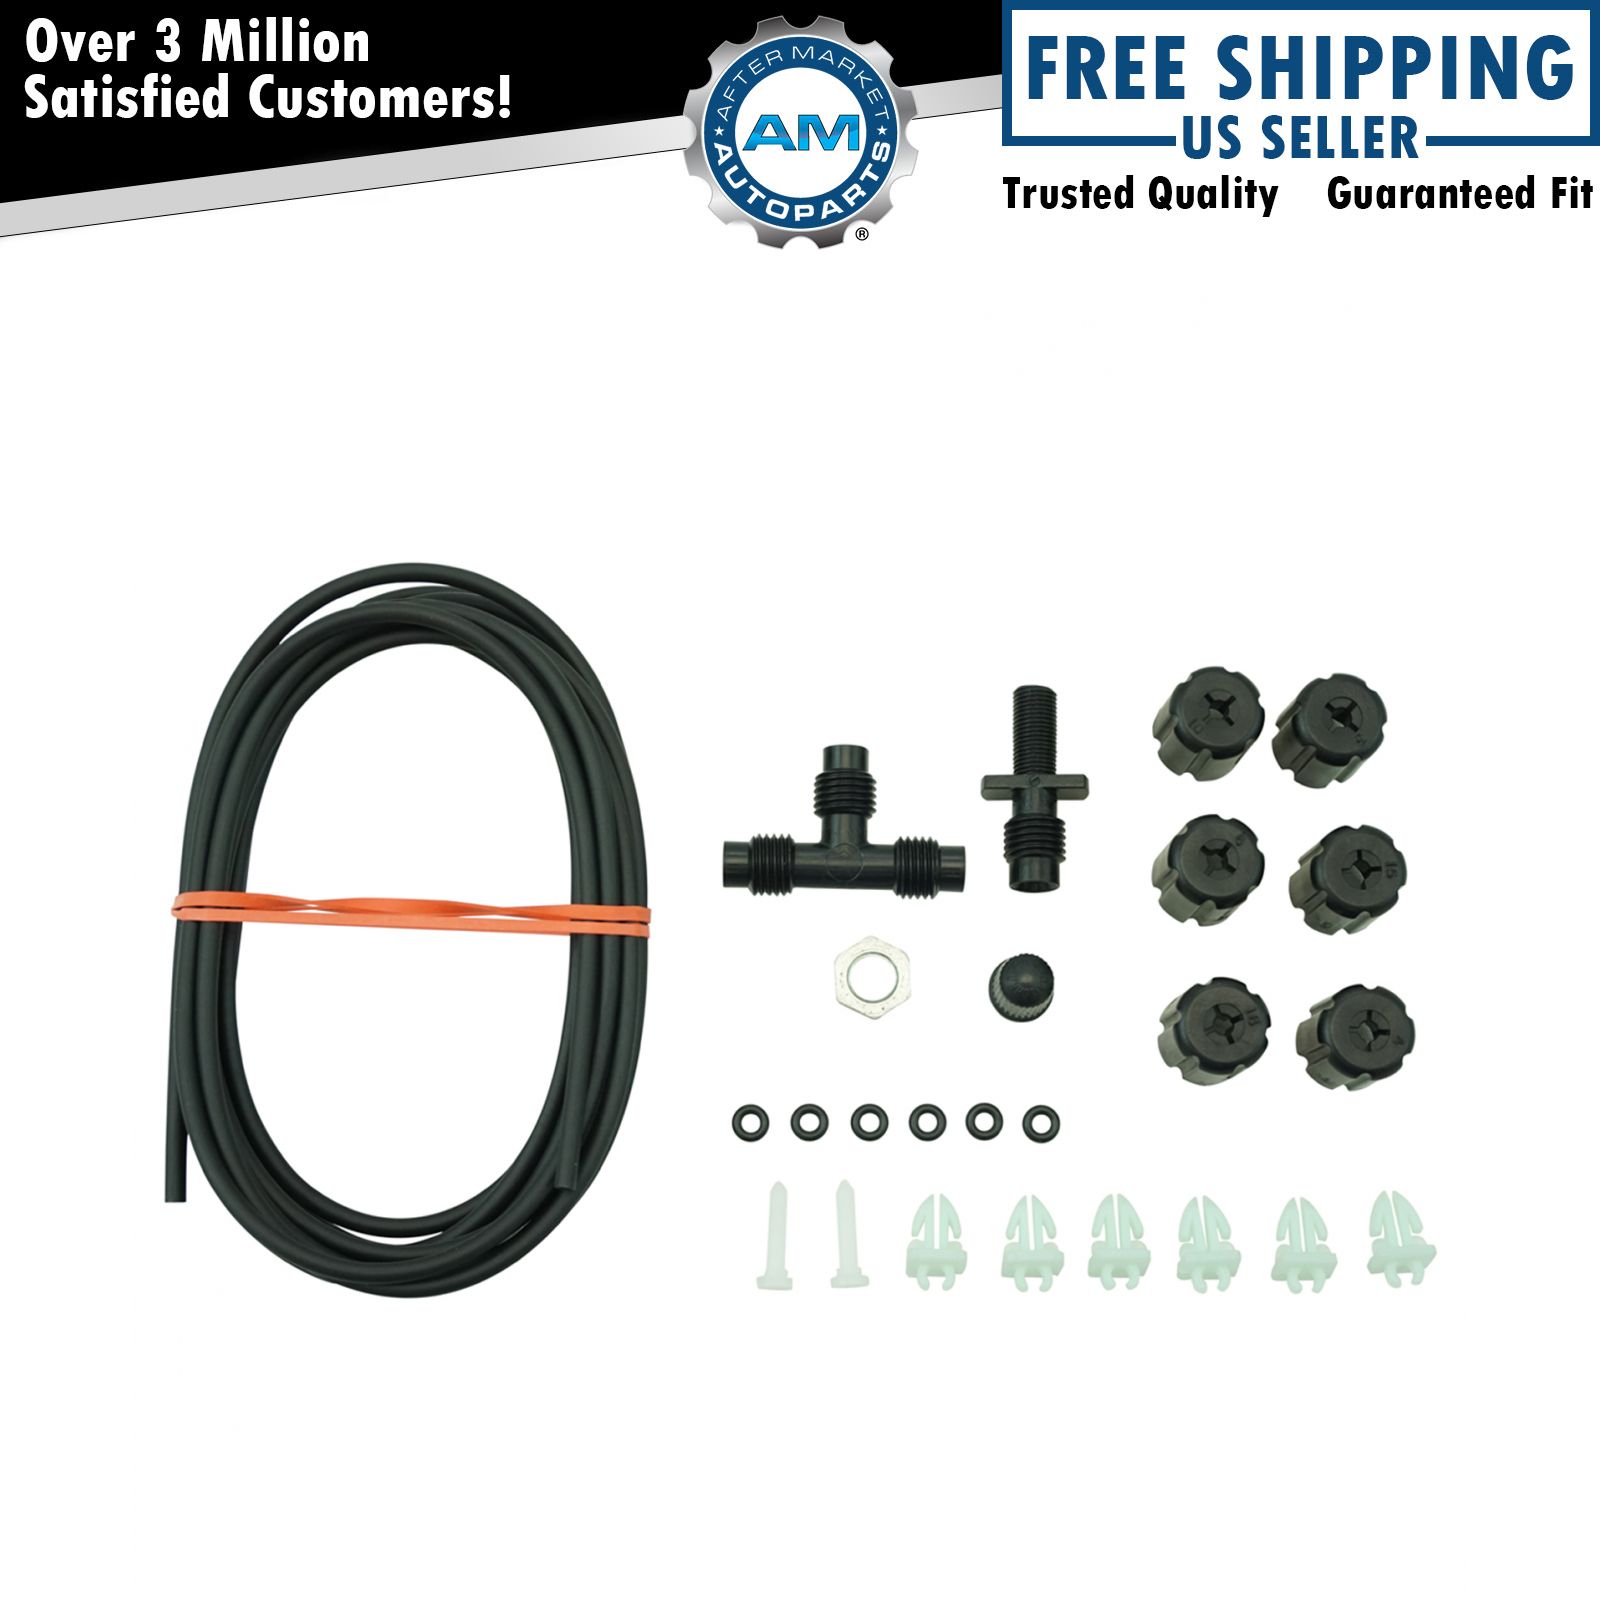 Monroe AK29 Shock Absorber Air Hose Kit for Buick Chevy GMC Ford Jeep Toyota New